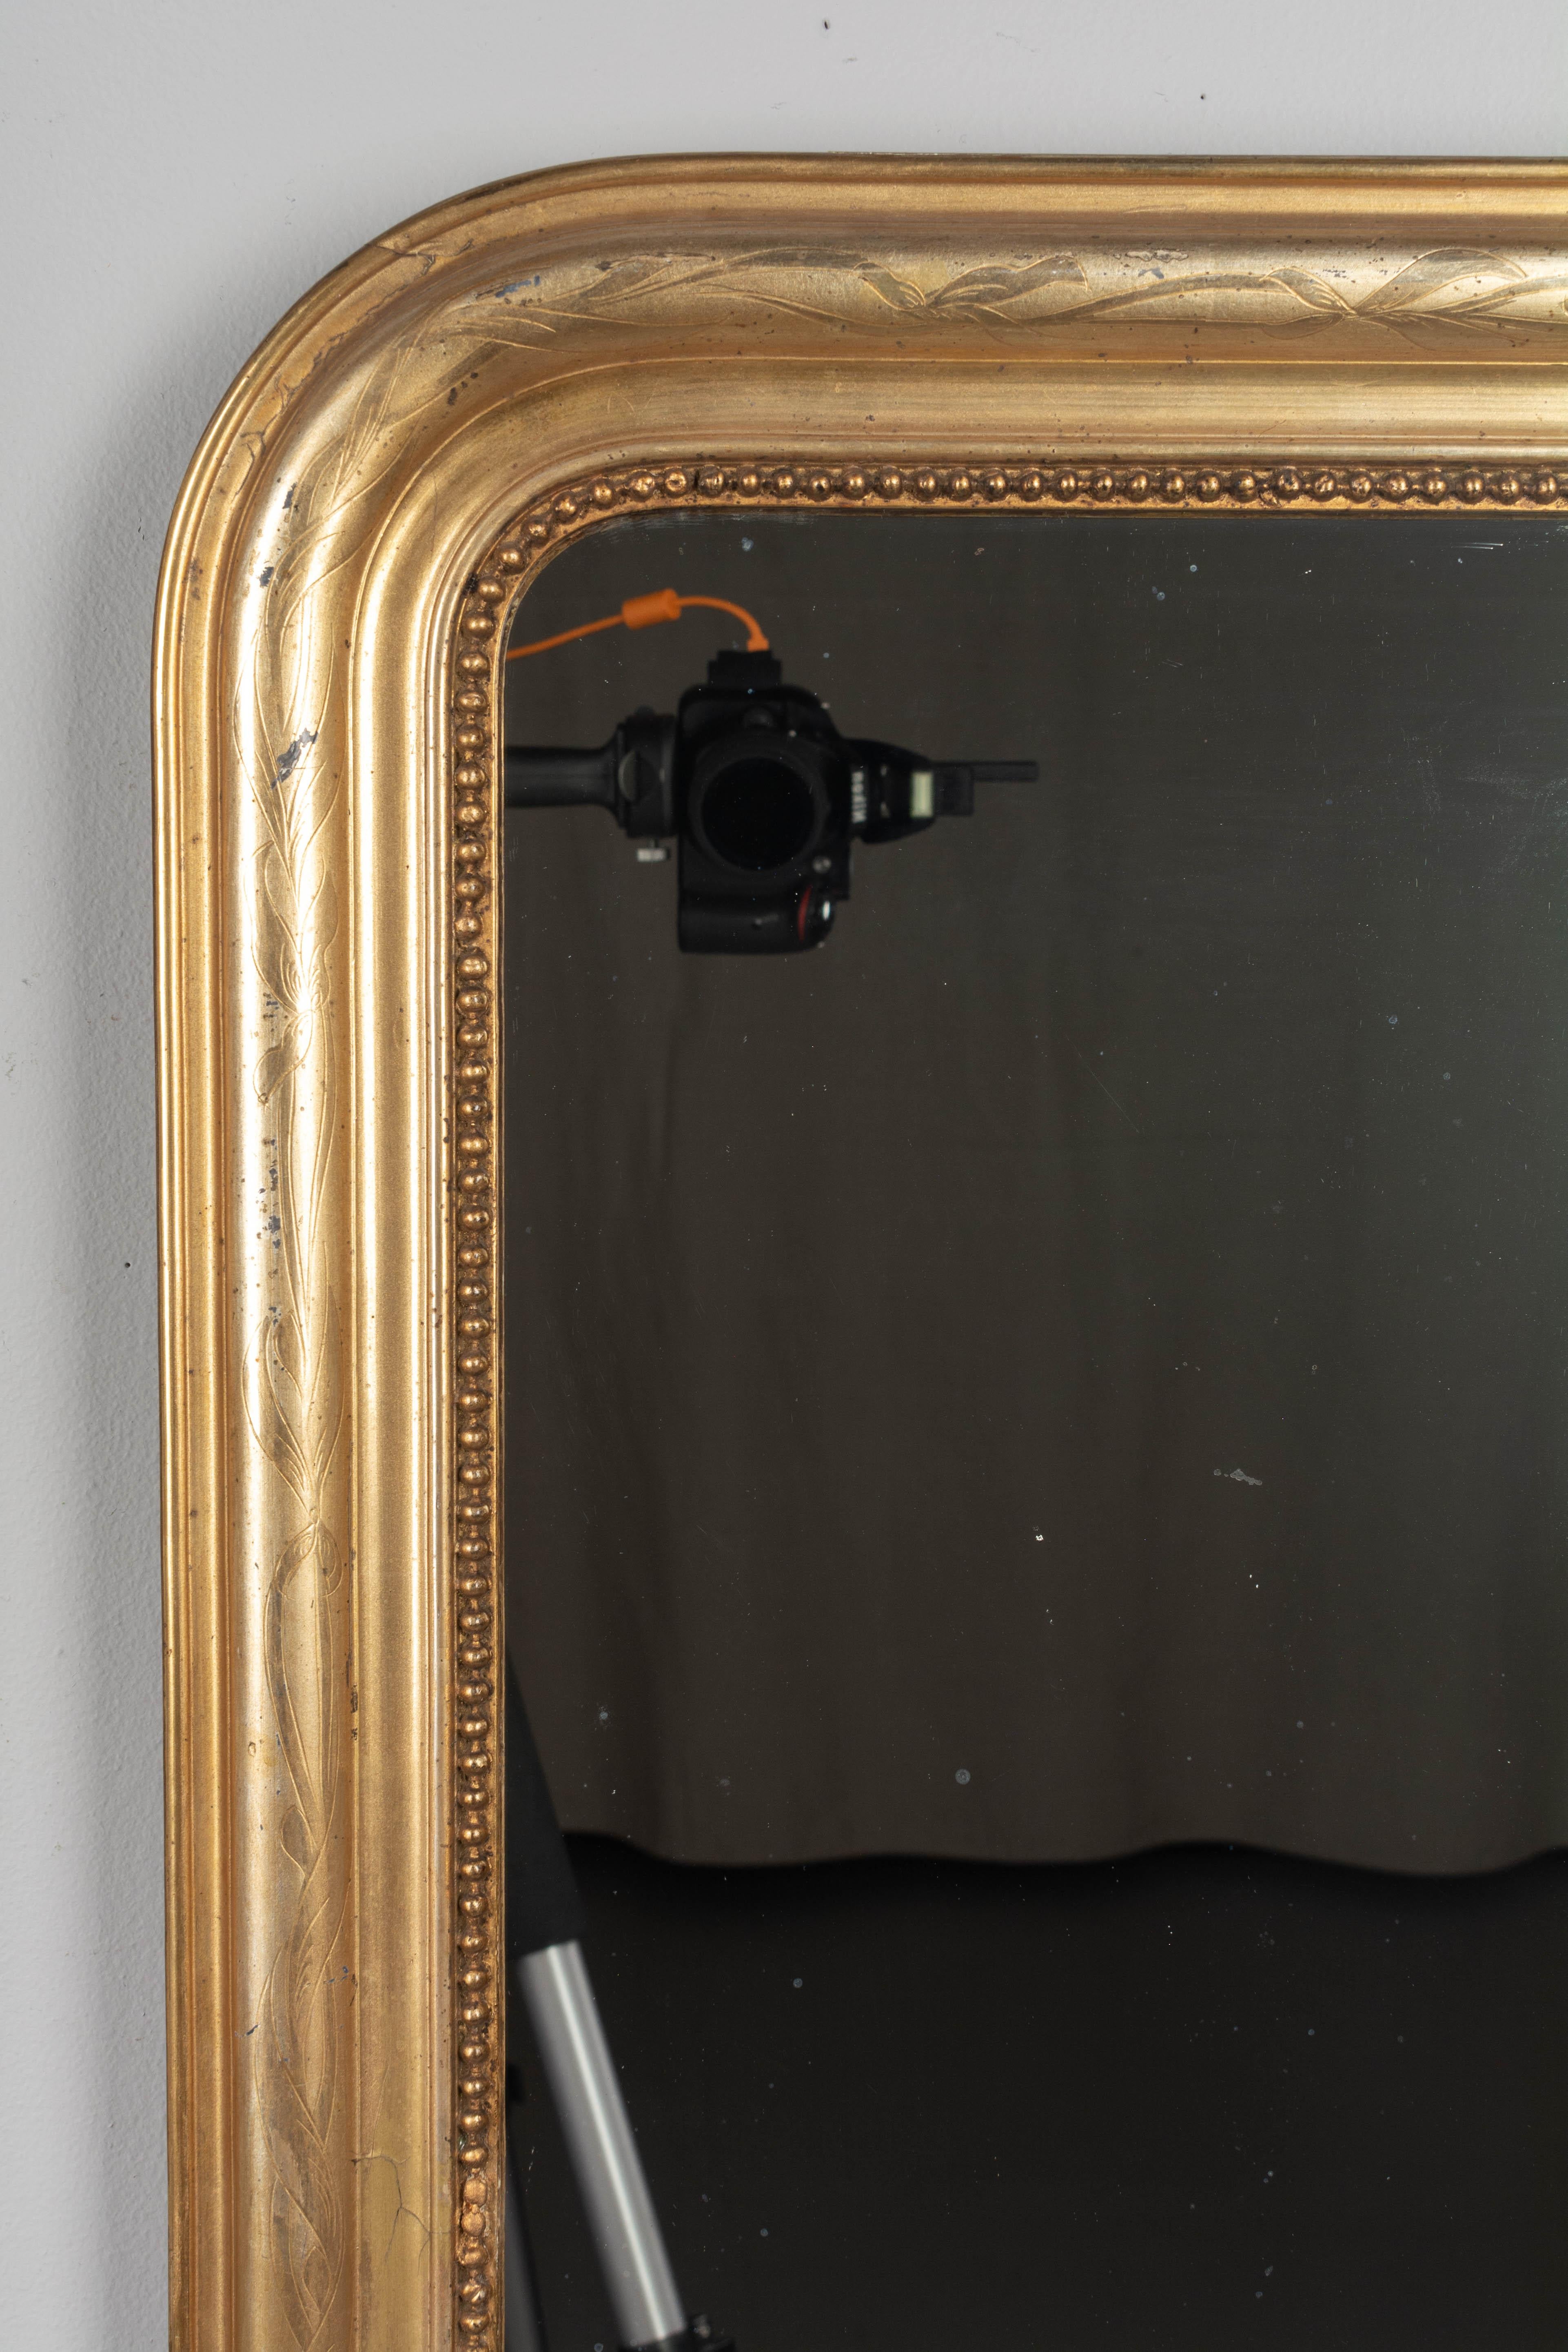 A French Louis Philippe style gilded mirror with curved top corners, incised decoration and inner bead border. Warm gilt finish. Original mirror. Frame has been restored on the upper right edge and bottom corners. Some touch-ups to gilt. Please